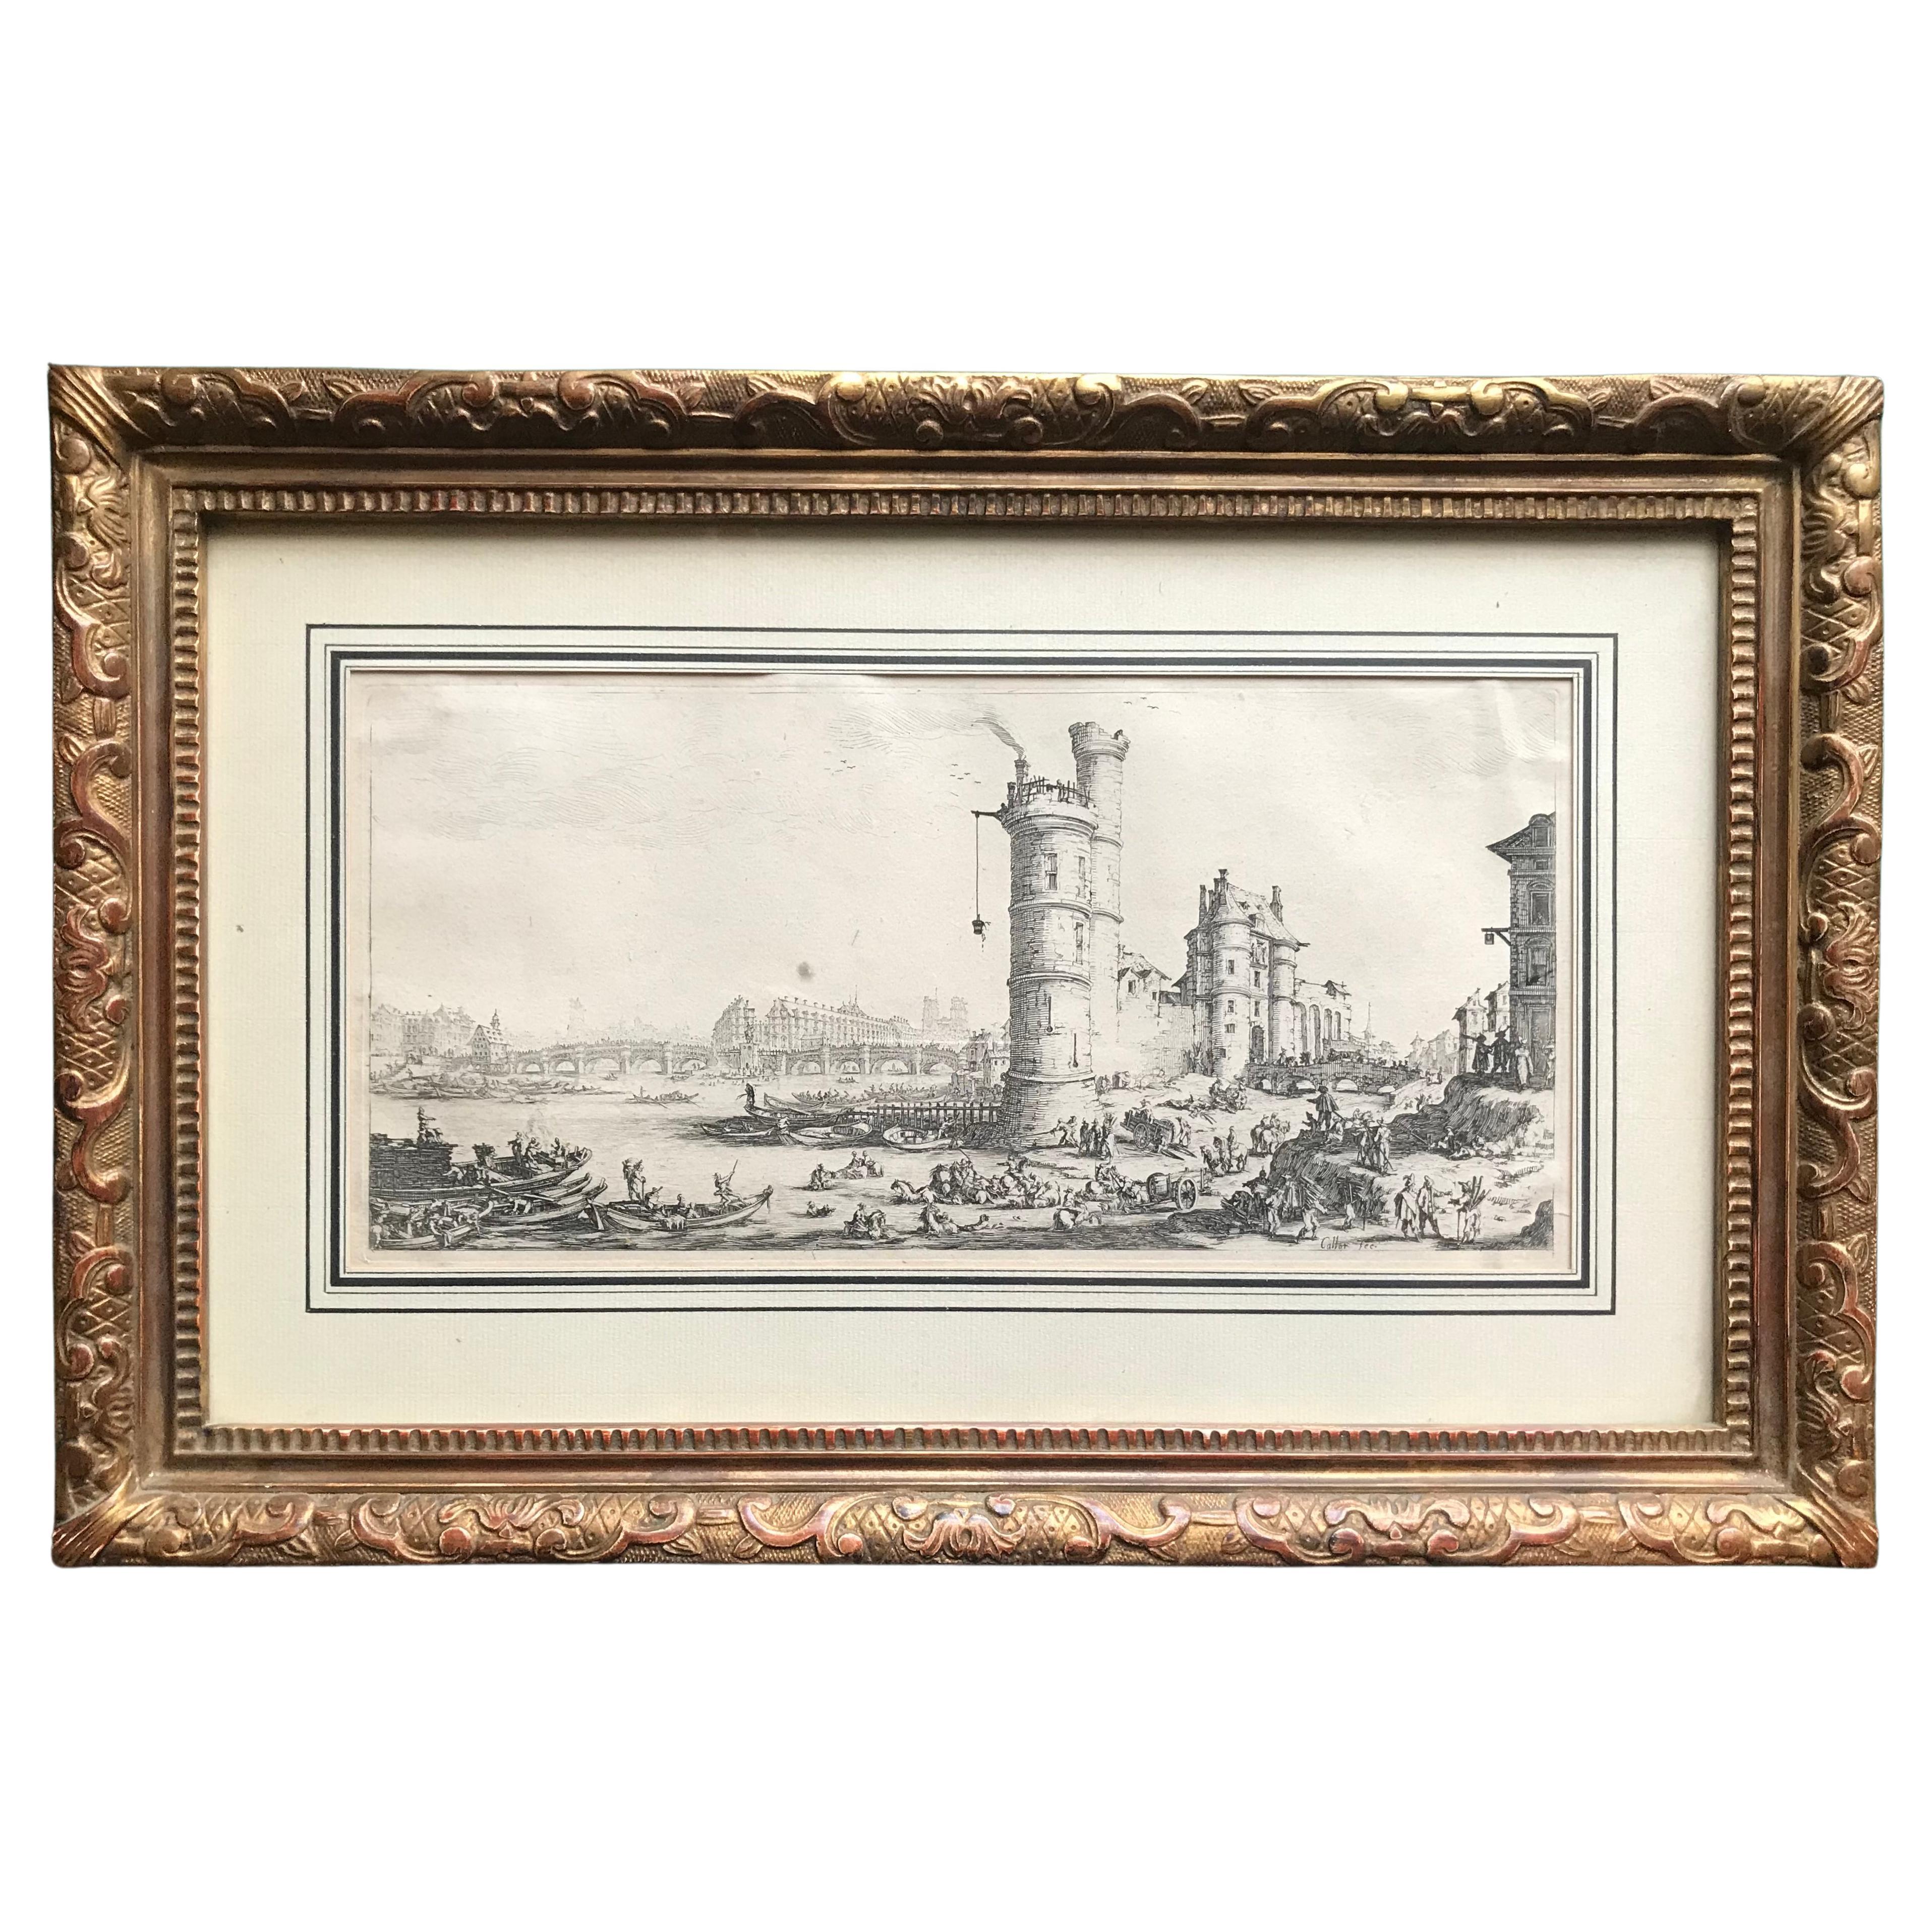 Jacques Callot "The Two Views Of Paris, 2, Pont Neuf" Engraving, 17th Century 